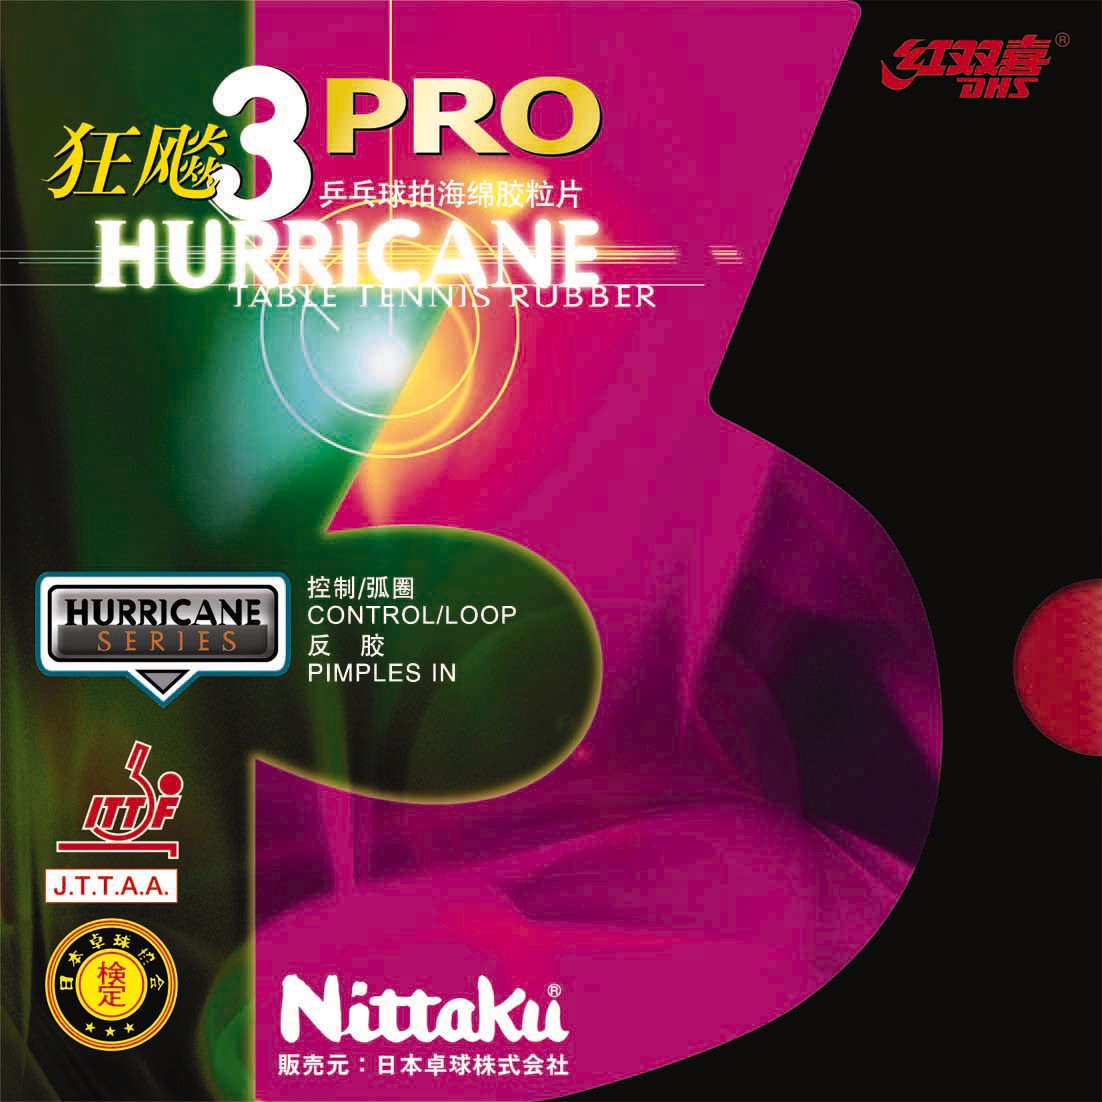 Table Tennis Rubber Details about   NITTAKU HURRICANE PRO 3 TURBO BLUE 